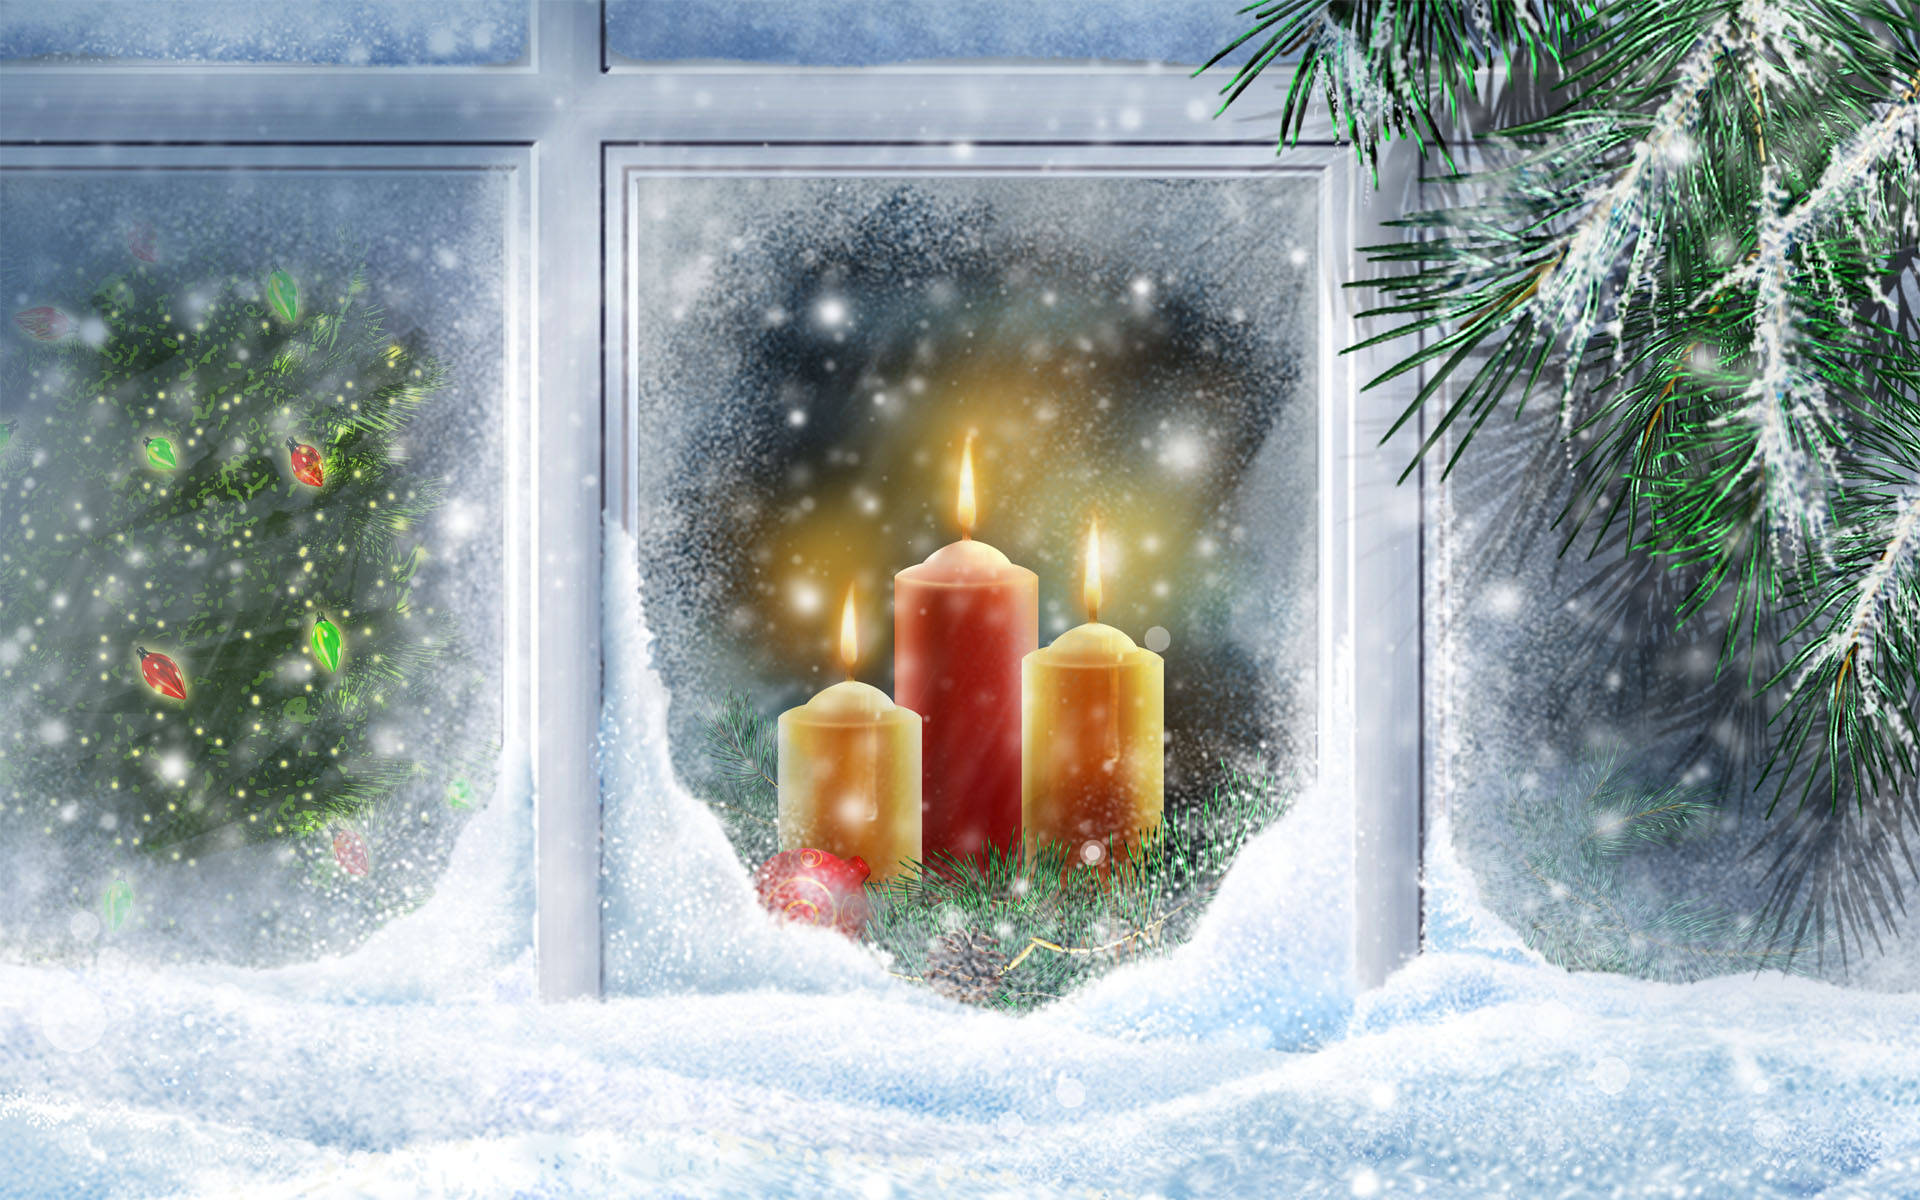 Celebrate the Holidays with a Special Christmas Widescreen Wallpaper